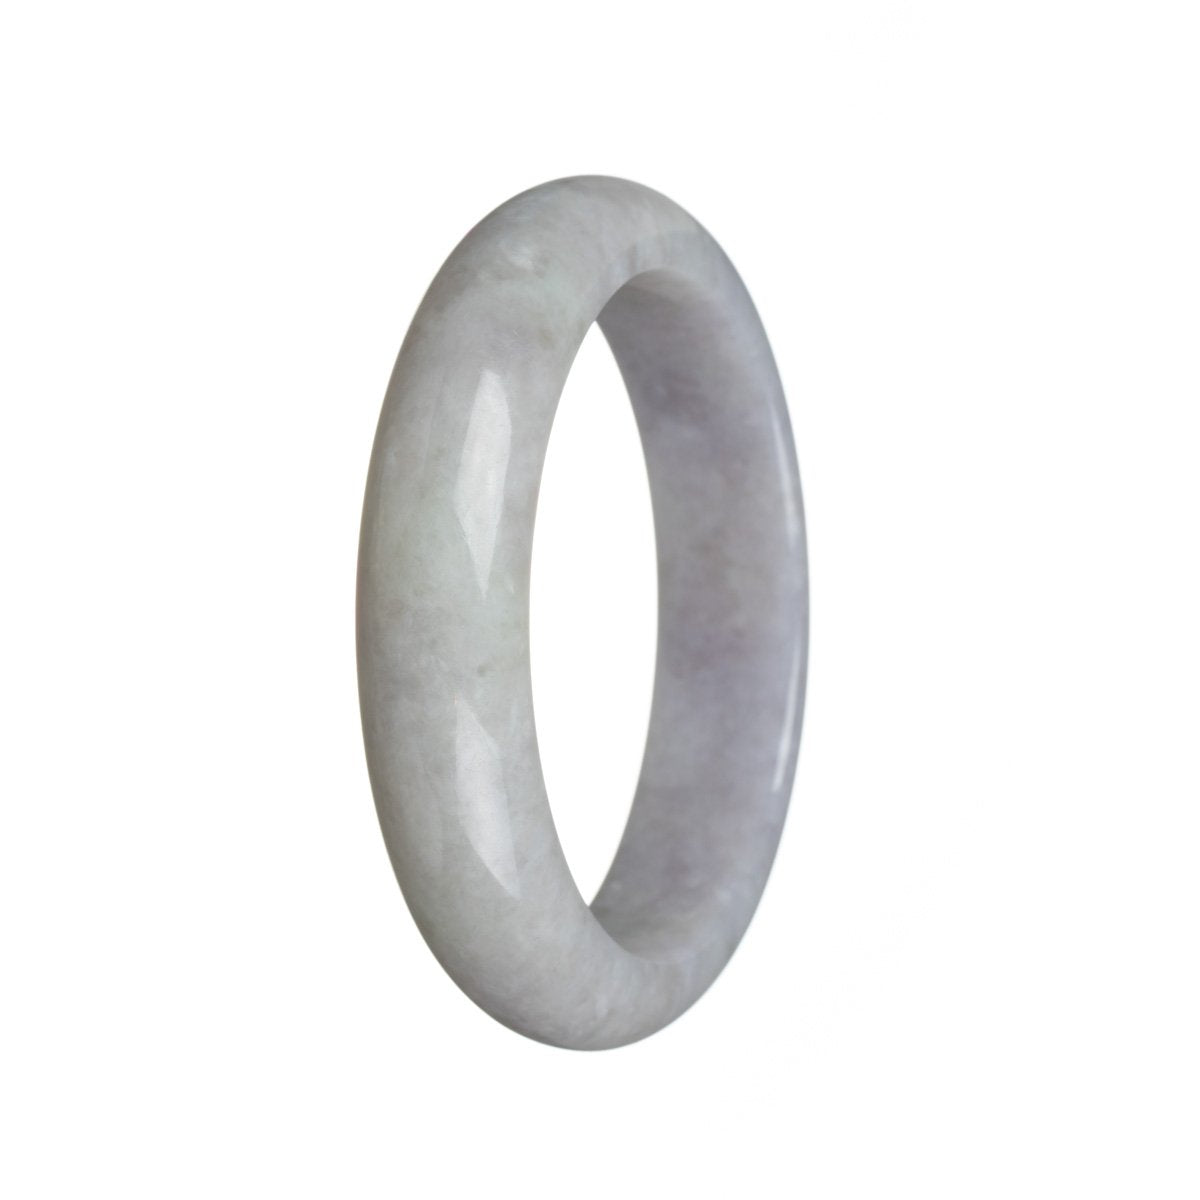 A lavender jadeite bangle with a semi-round shape, measuring 61mm in diameter.